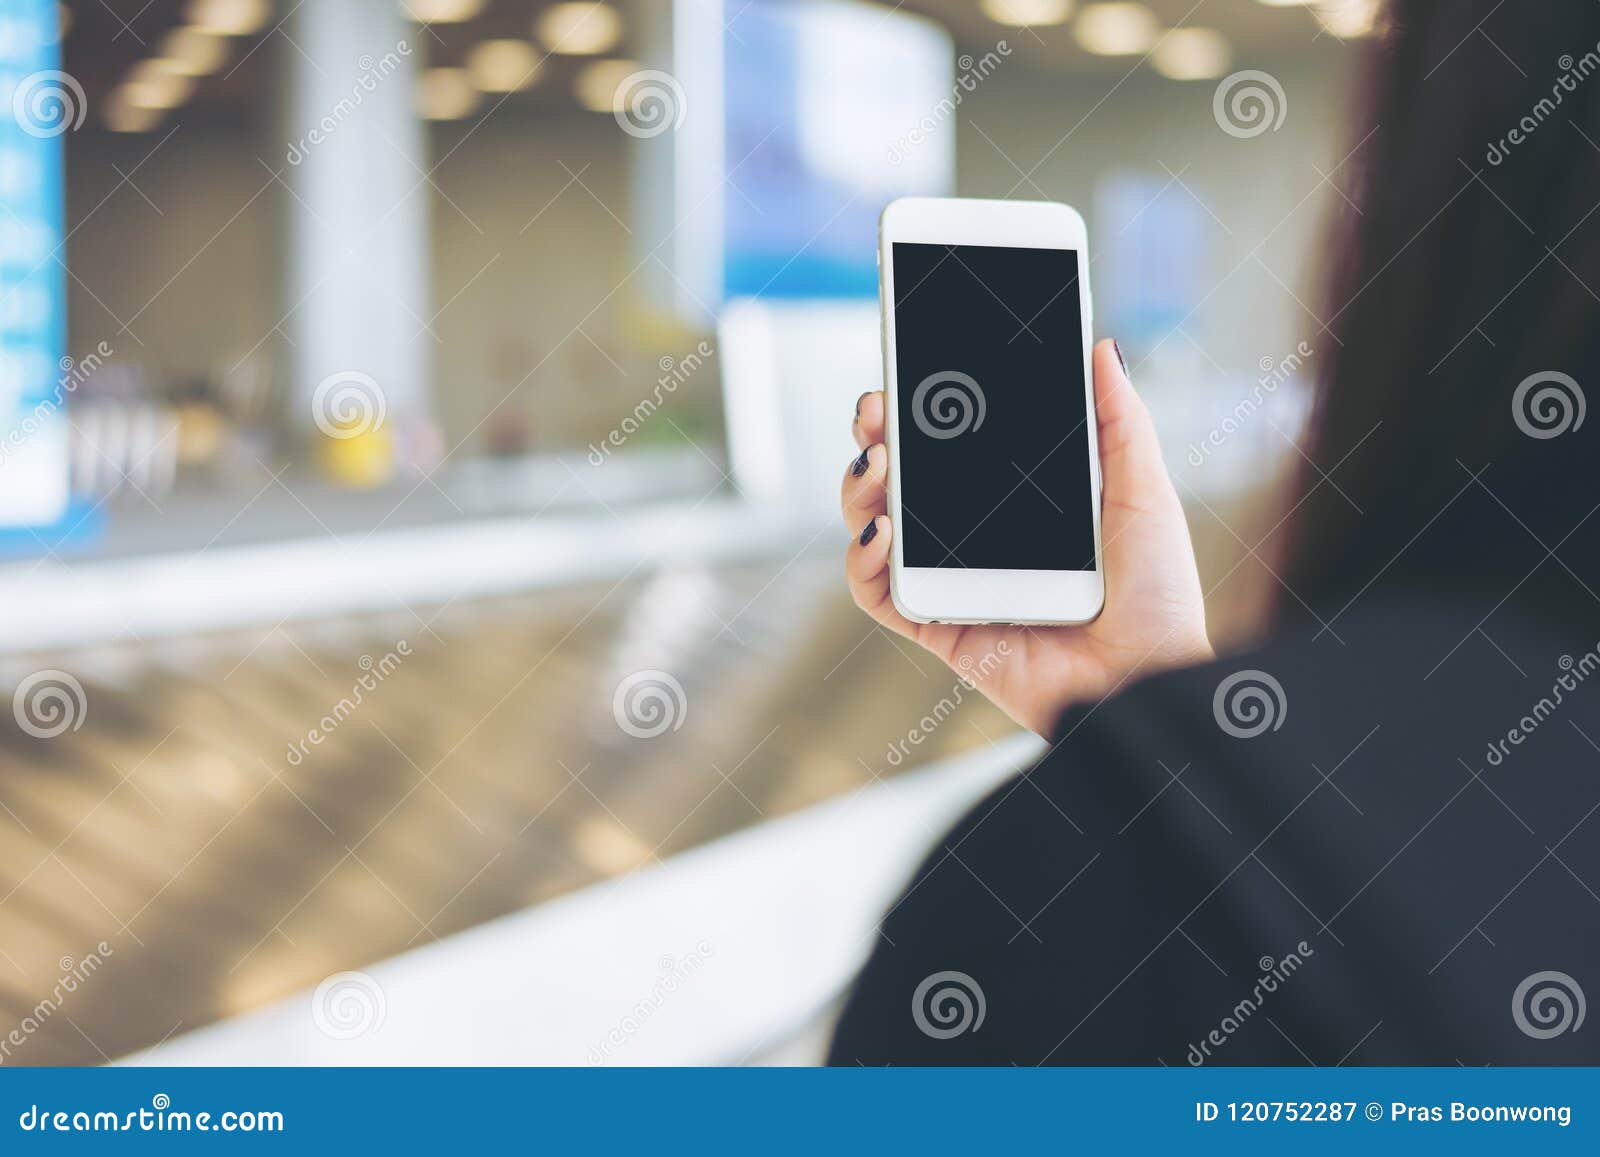 Woman Holding And Using Mobile Phone While Waiting For